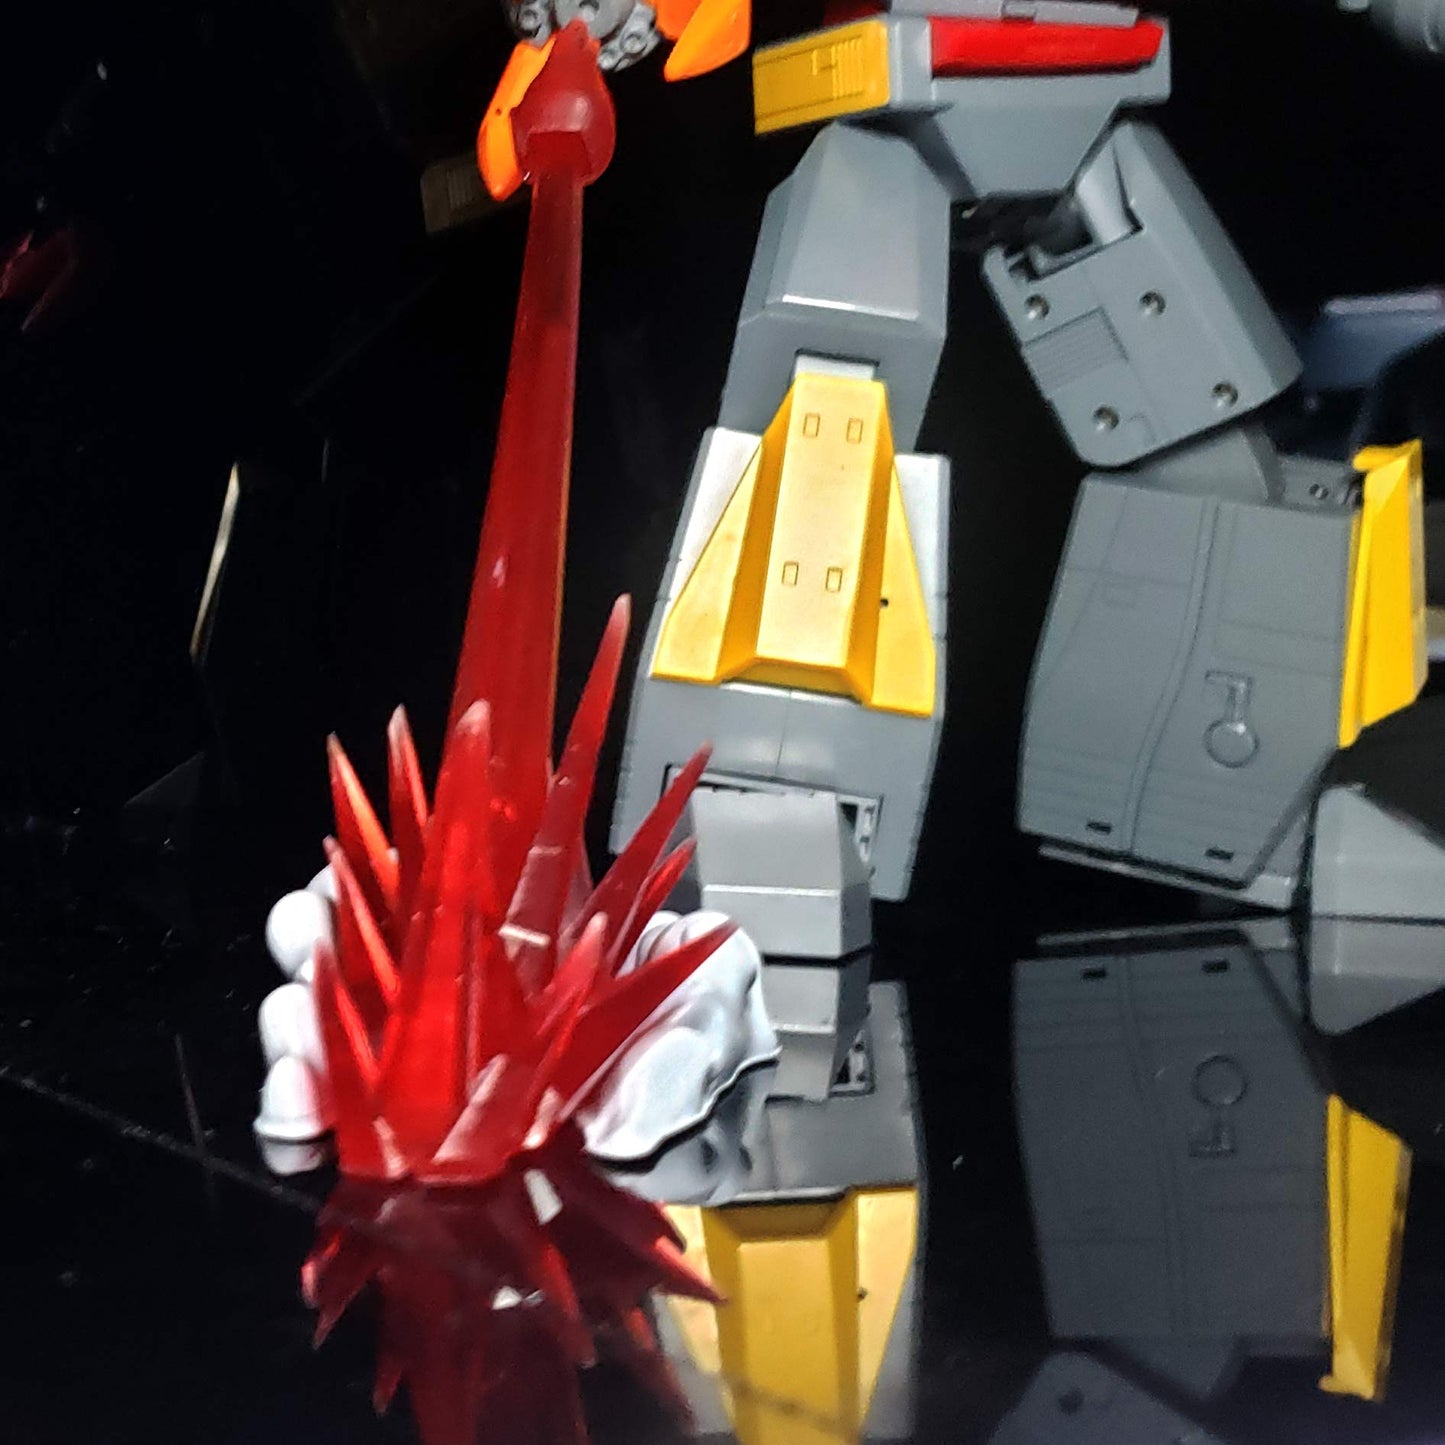 New Age Omega Supreme Direct Energy Weapon FX